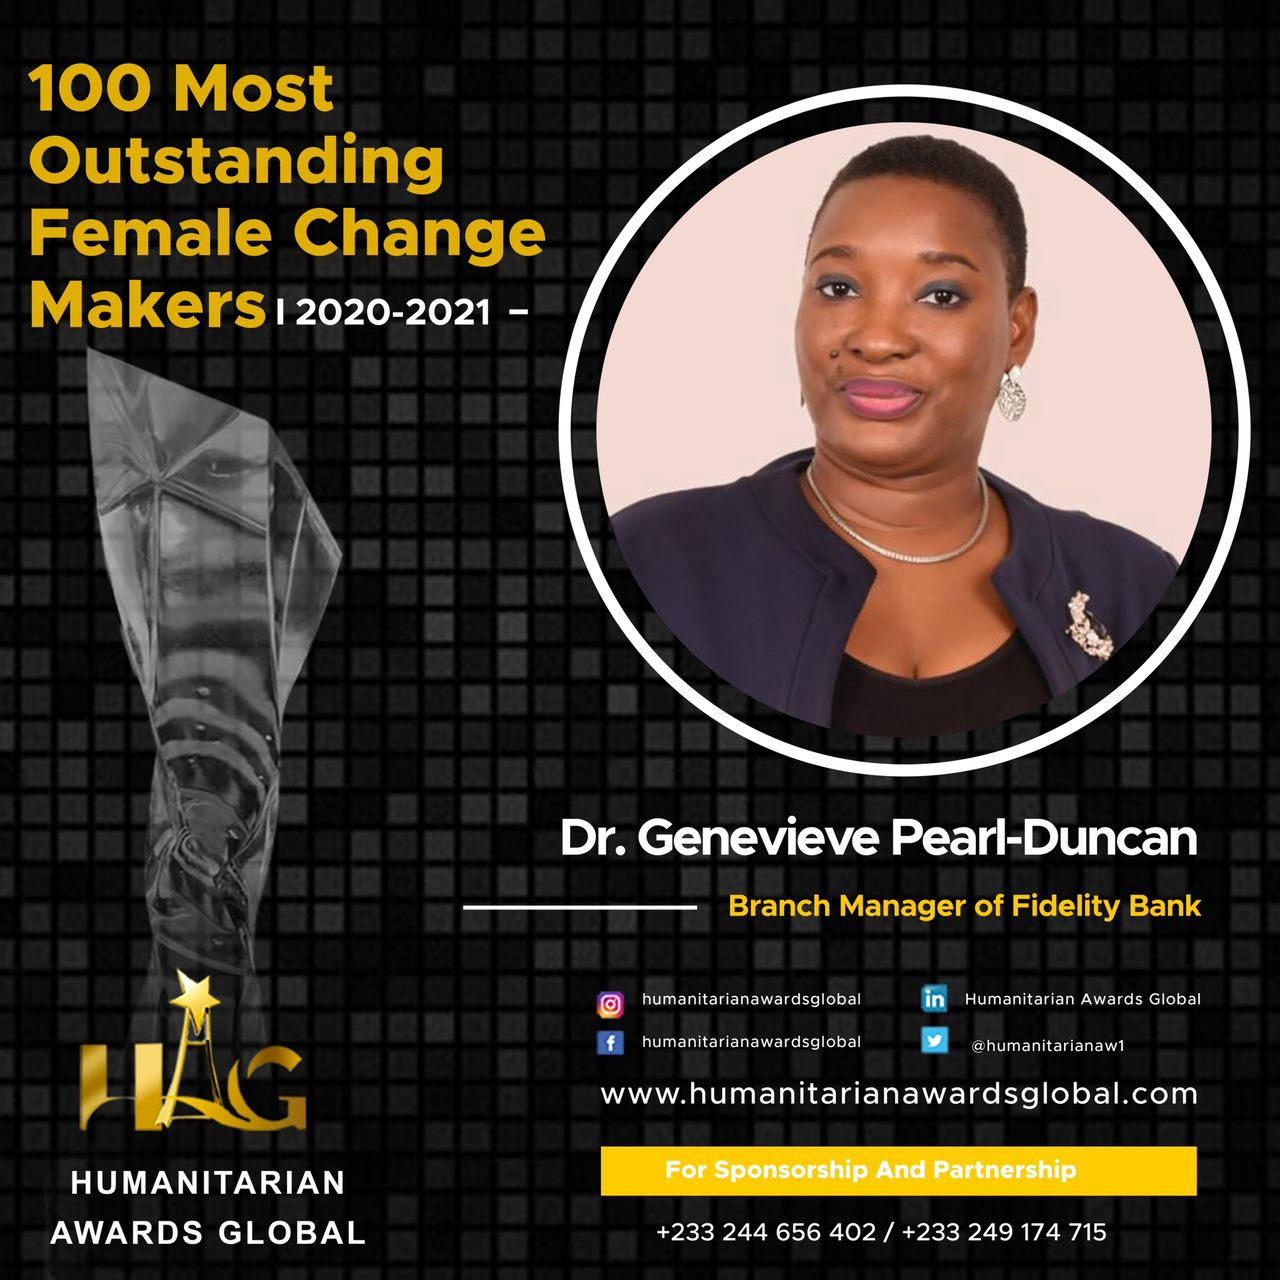 Congratulations Dr. Genevieve Pearl Duncan Obuobi For Being In The League Of The 2020/2021 100 Most Outstanding Female Change Makers In Ghana